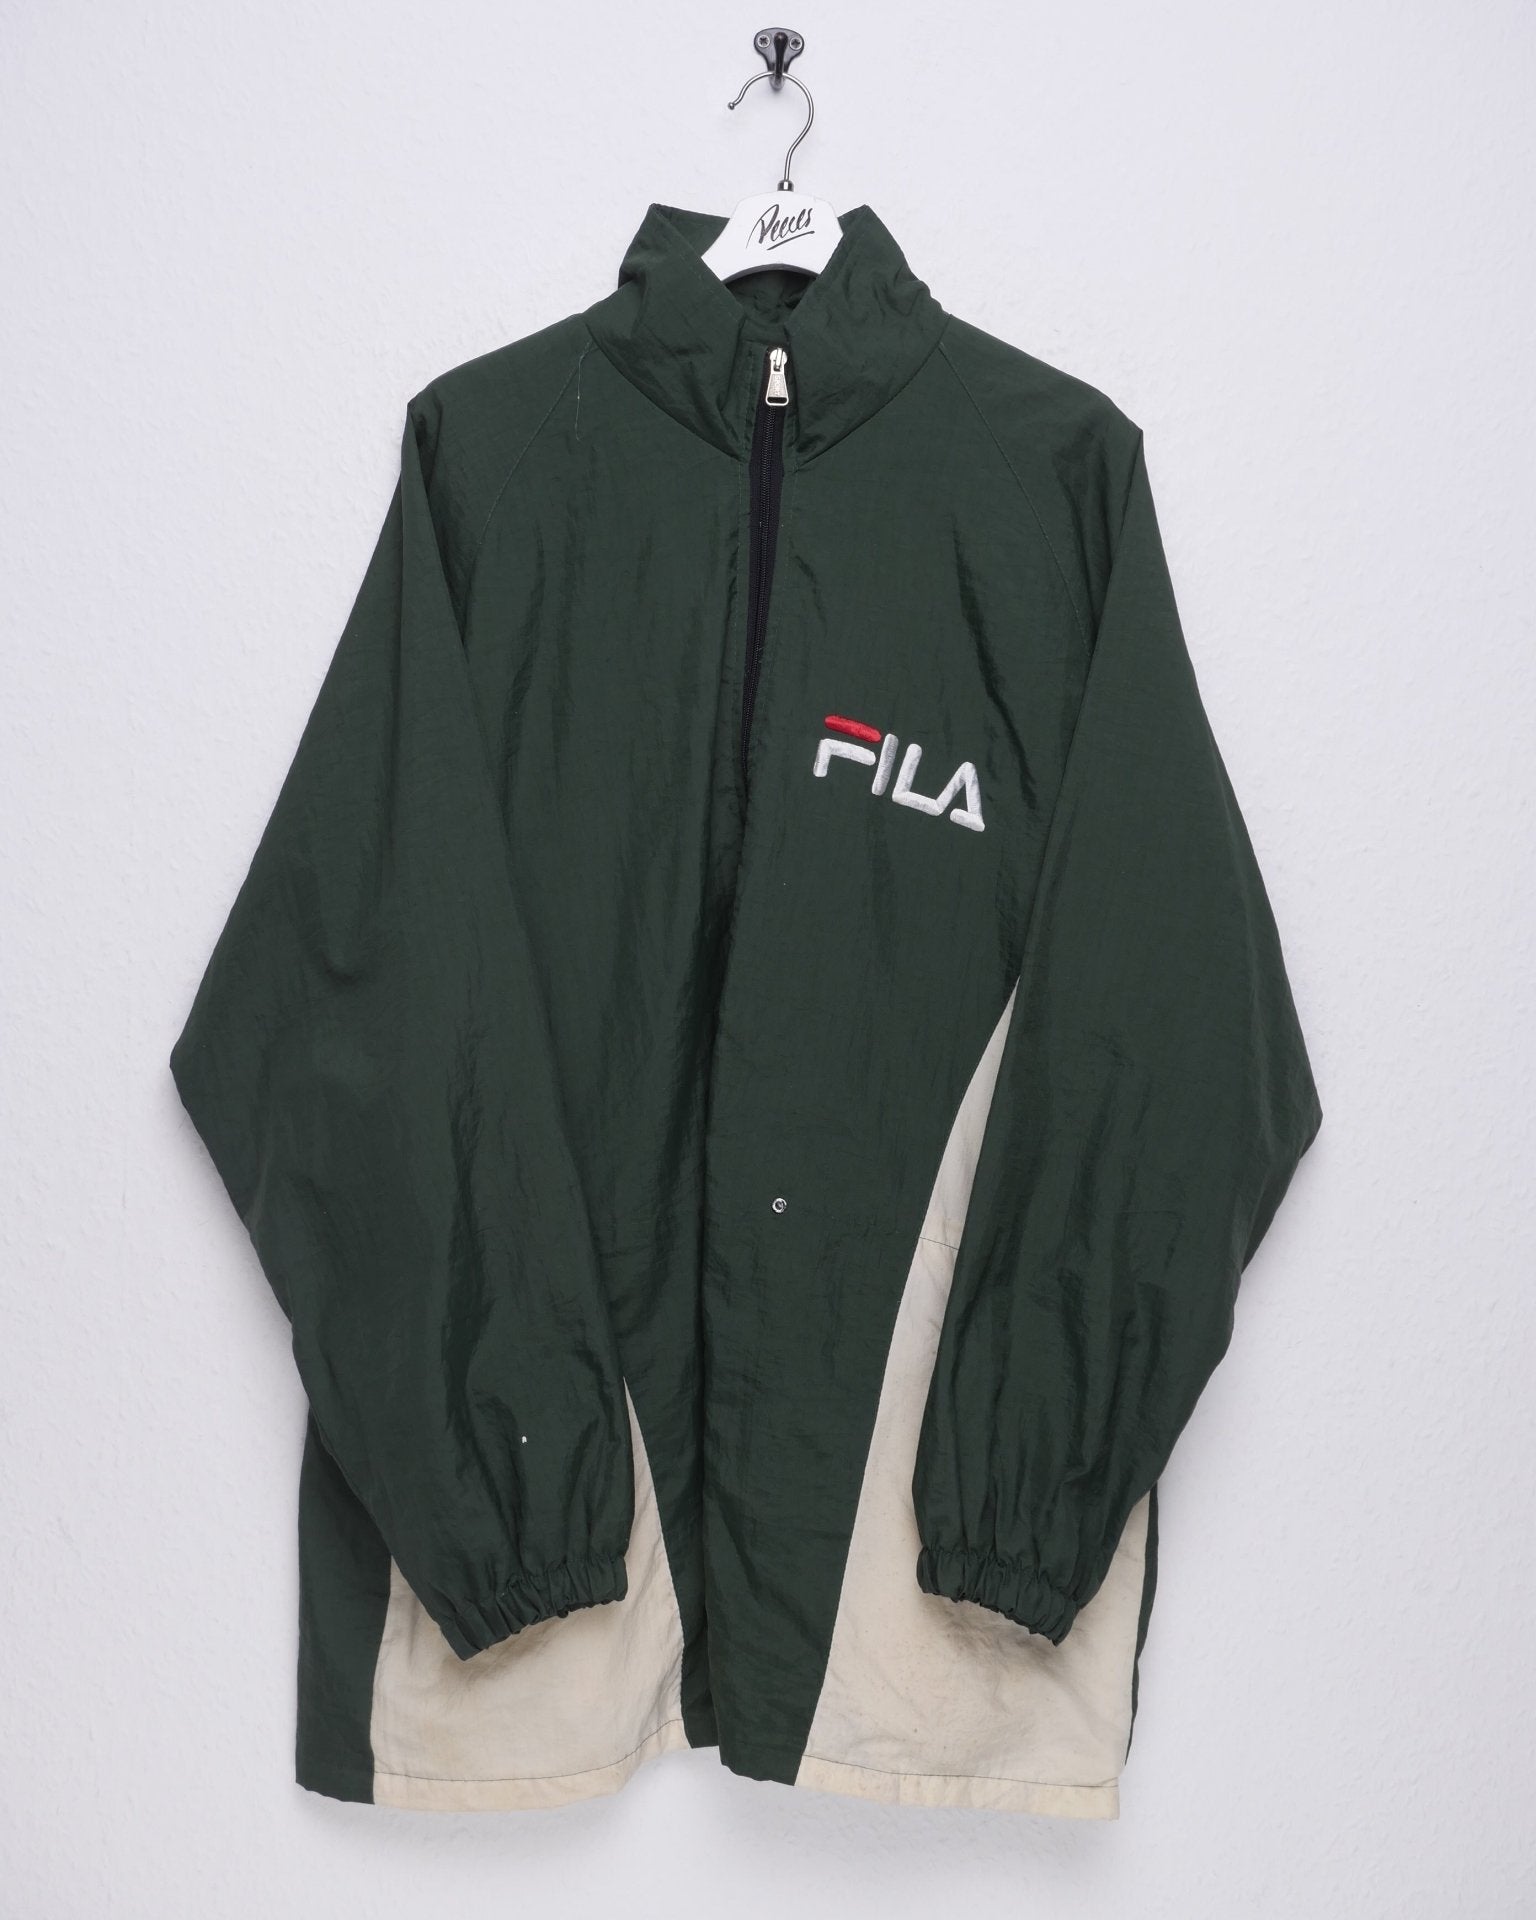 Fila embroidered Spellout two toned Track Jacke - Peeces